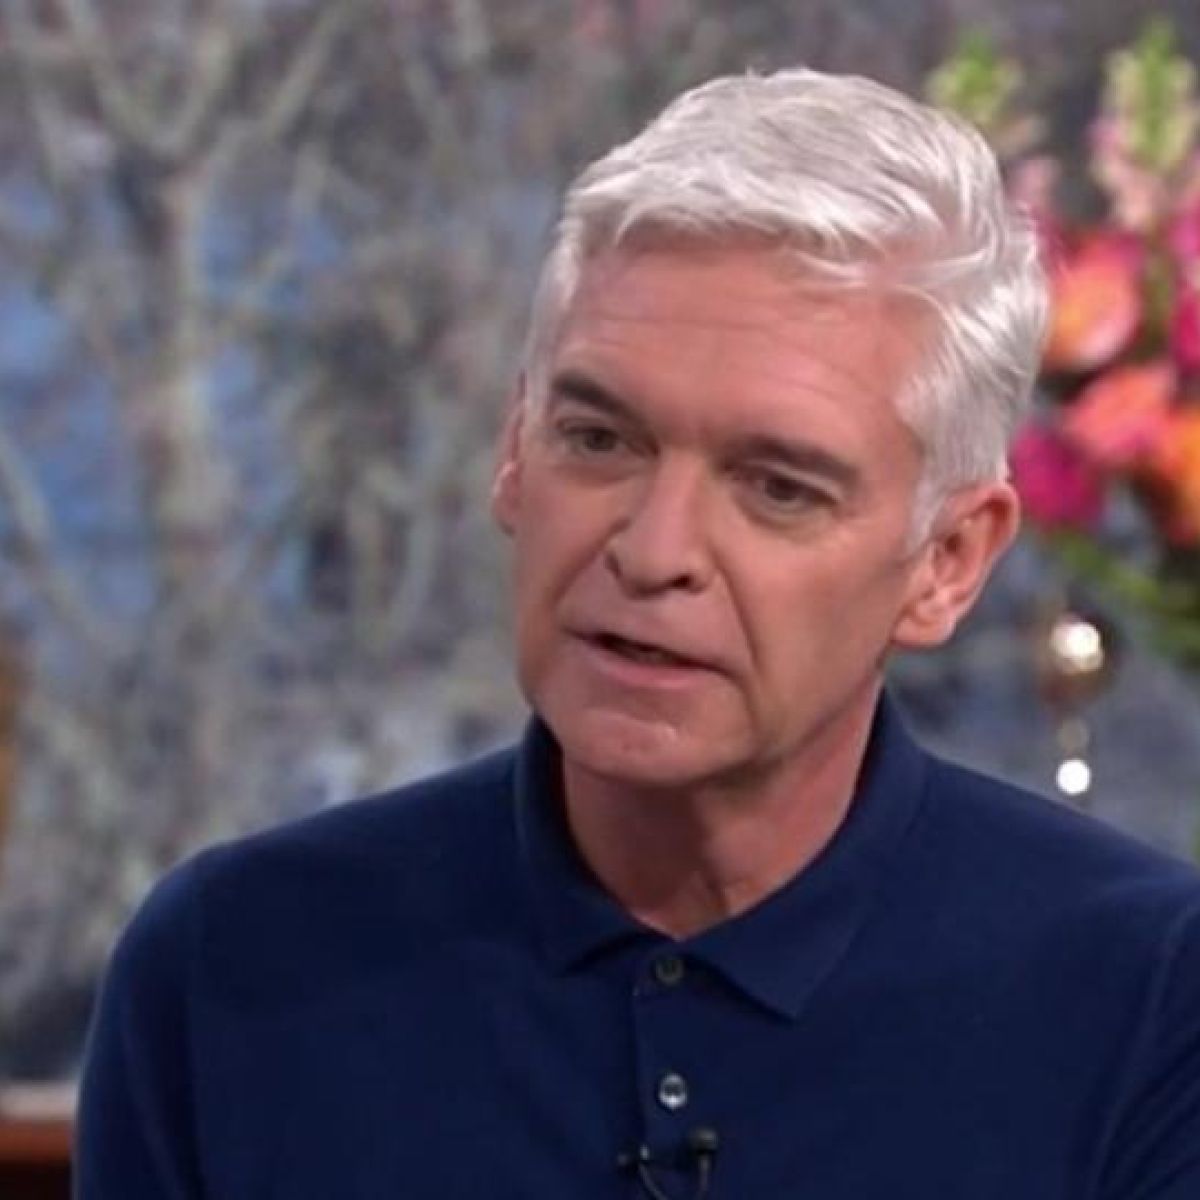 Phillip Schofield Comes Out As Gay In Emotional Instagram Post